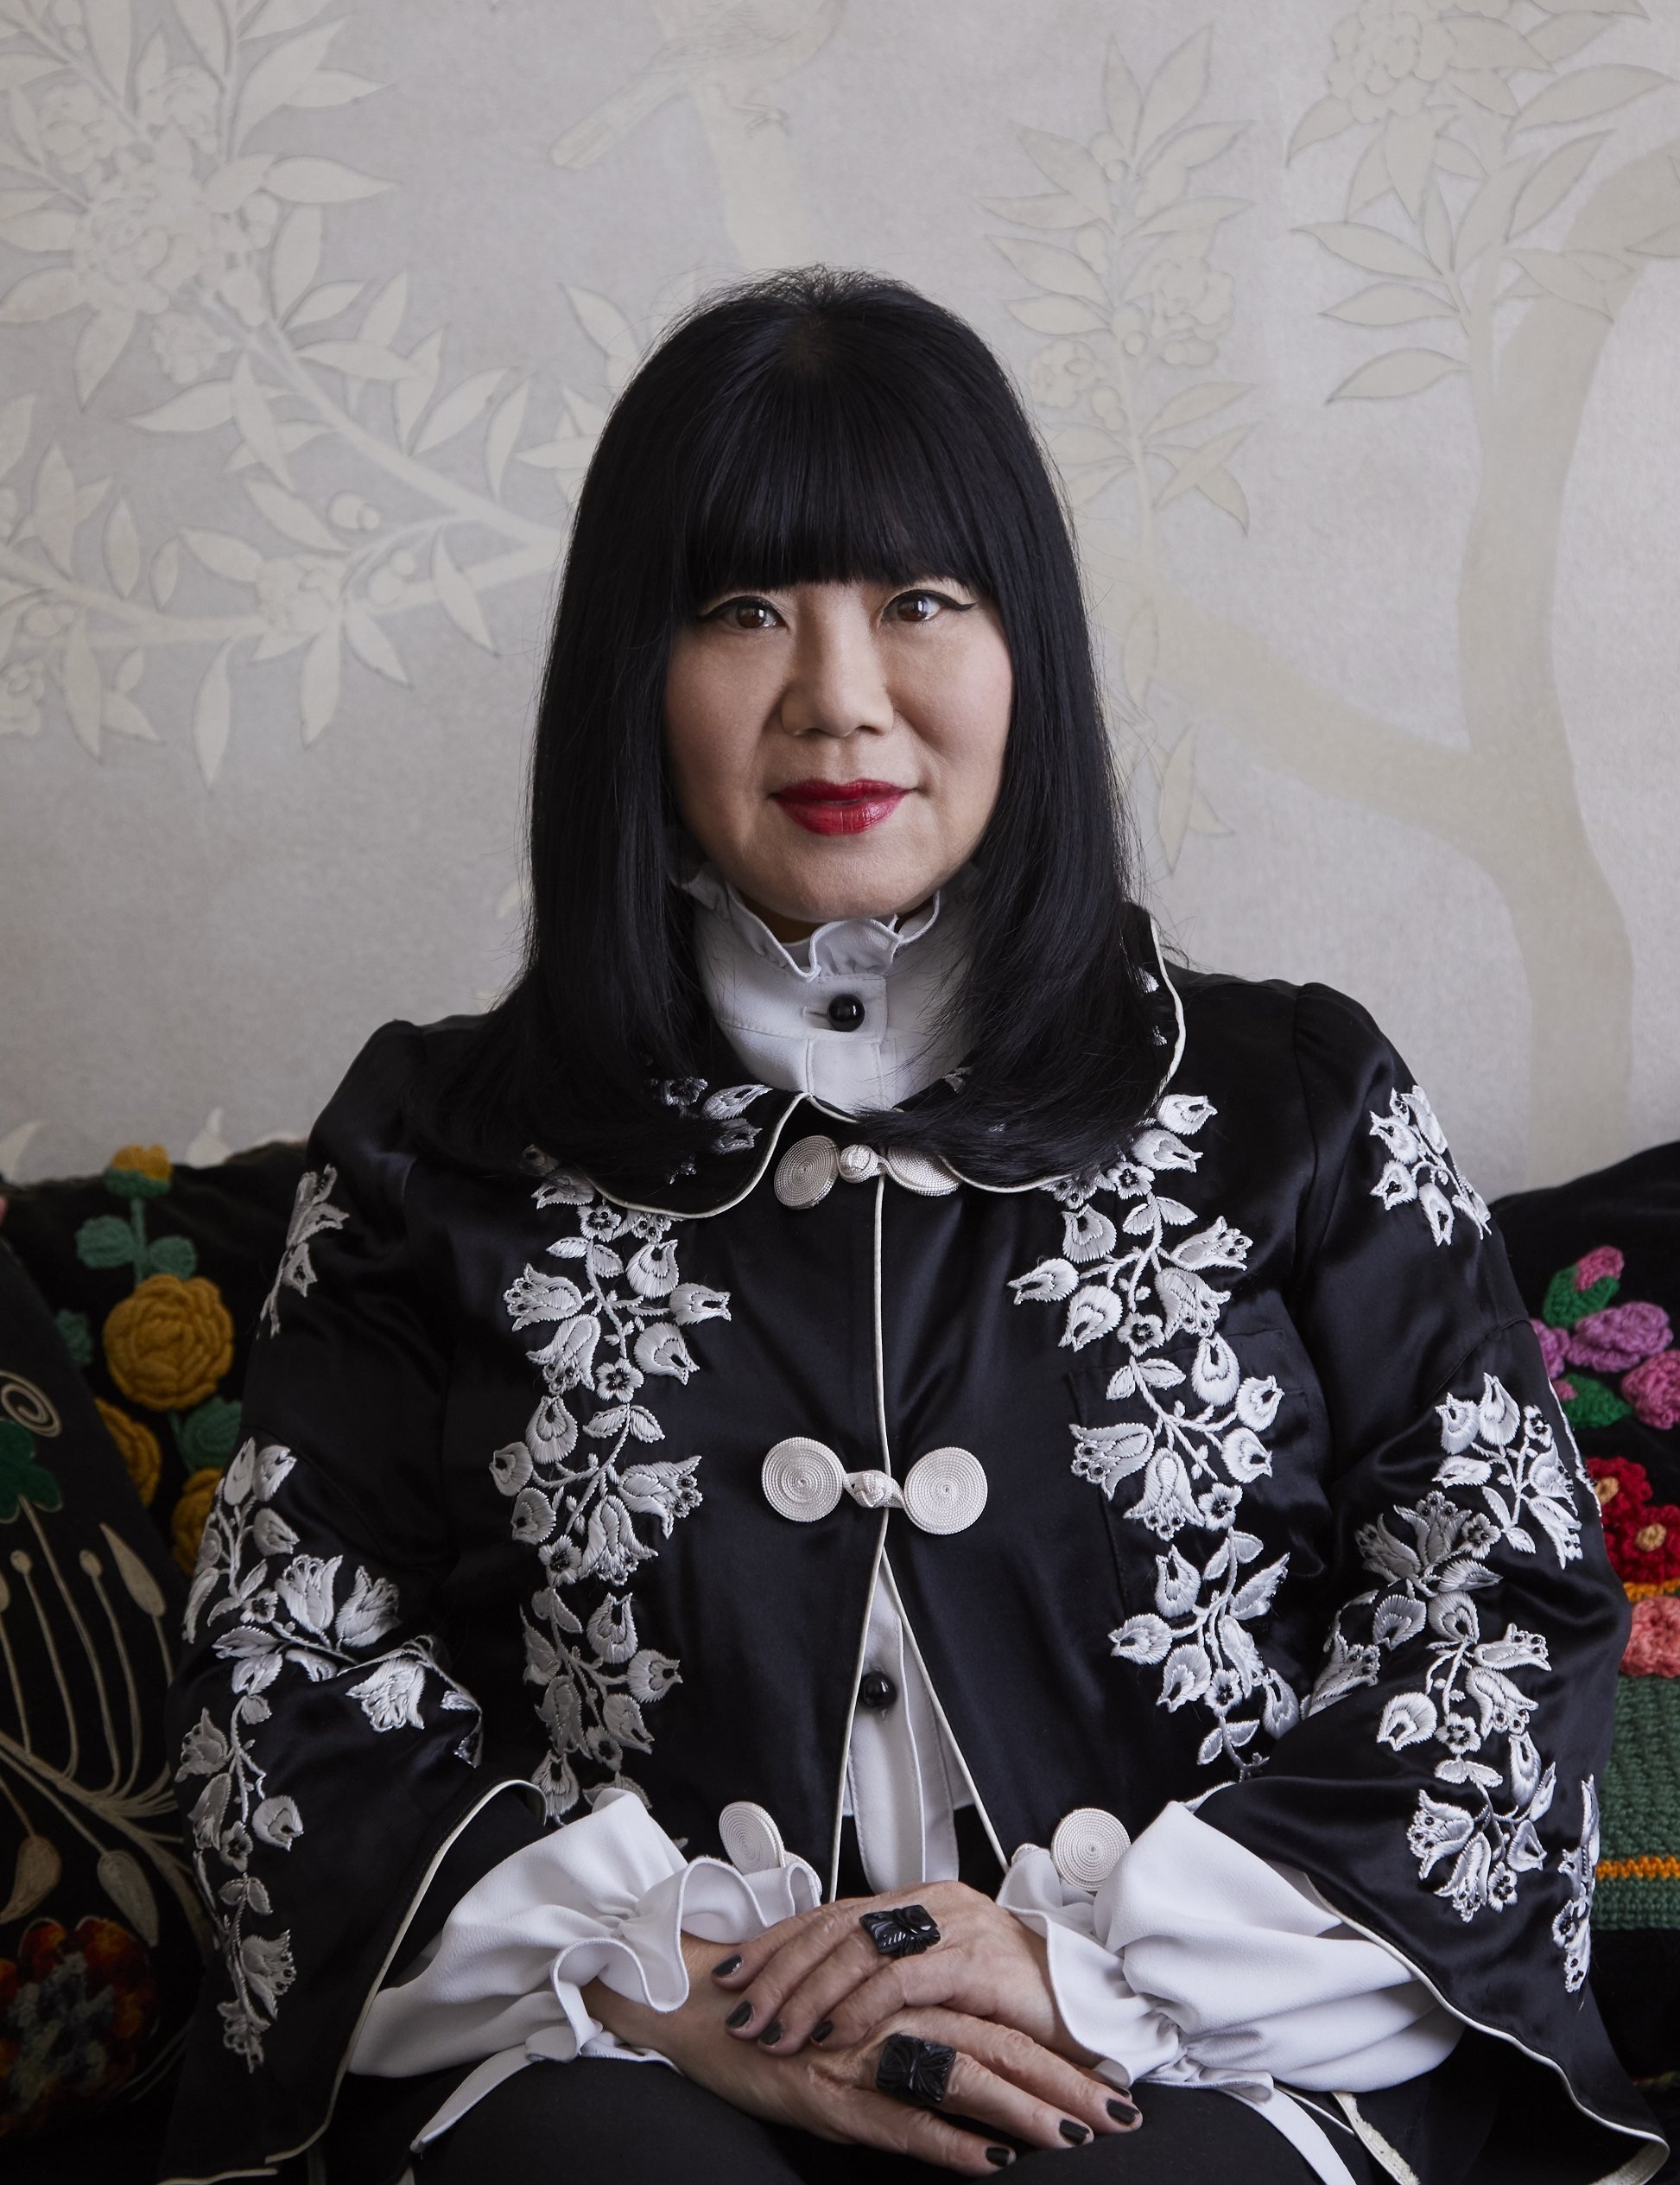 Anna Sui, fashion designer, on being inspired by Madonna, 1980s